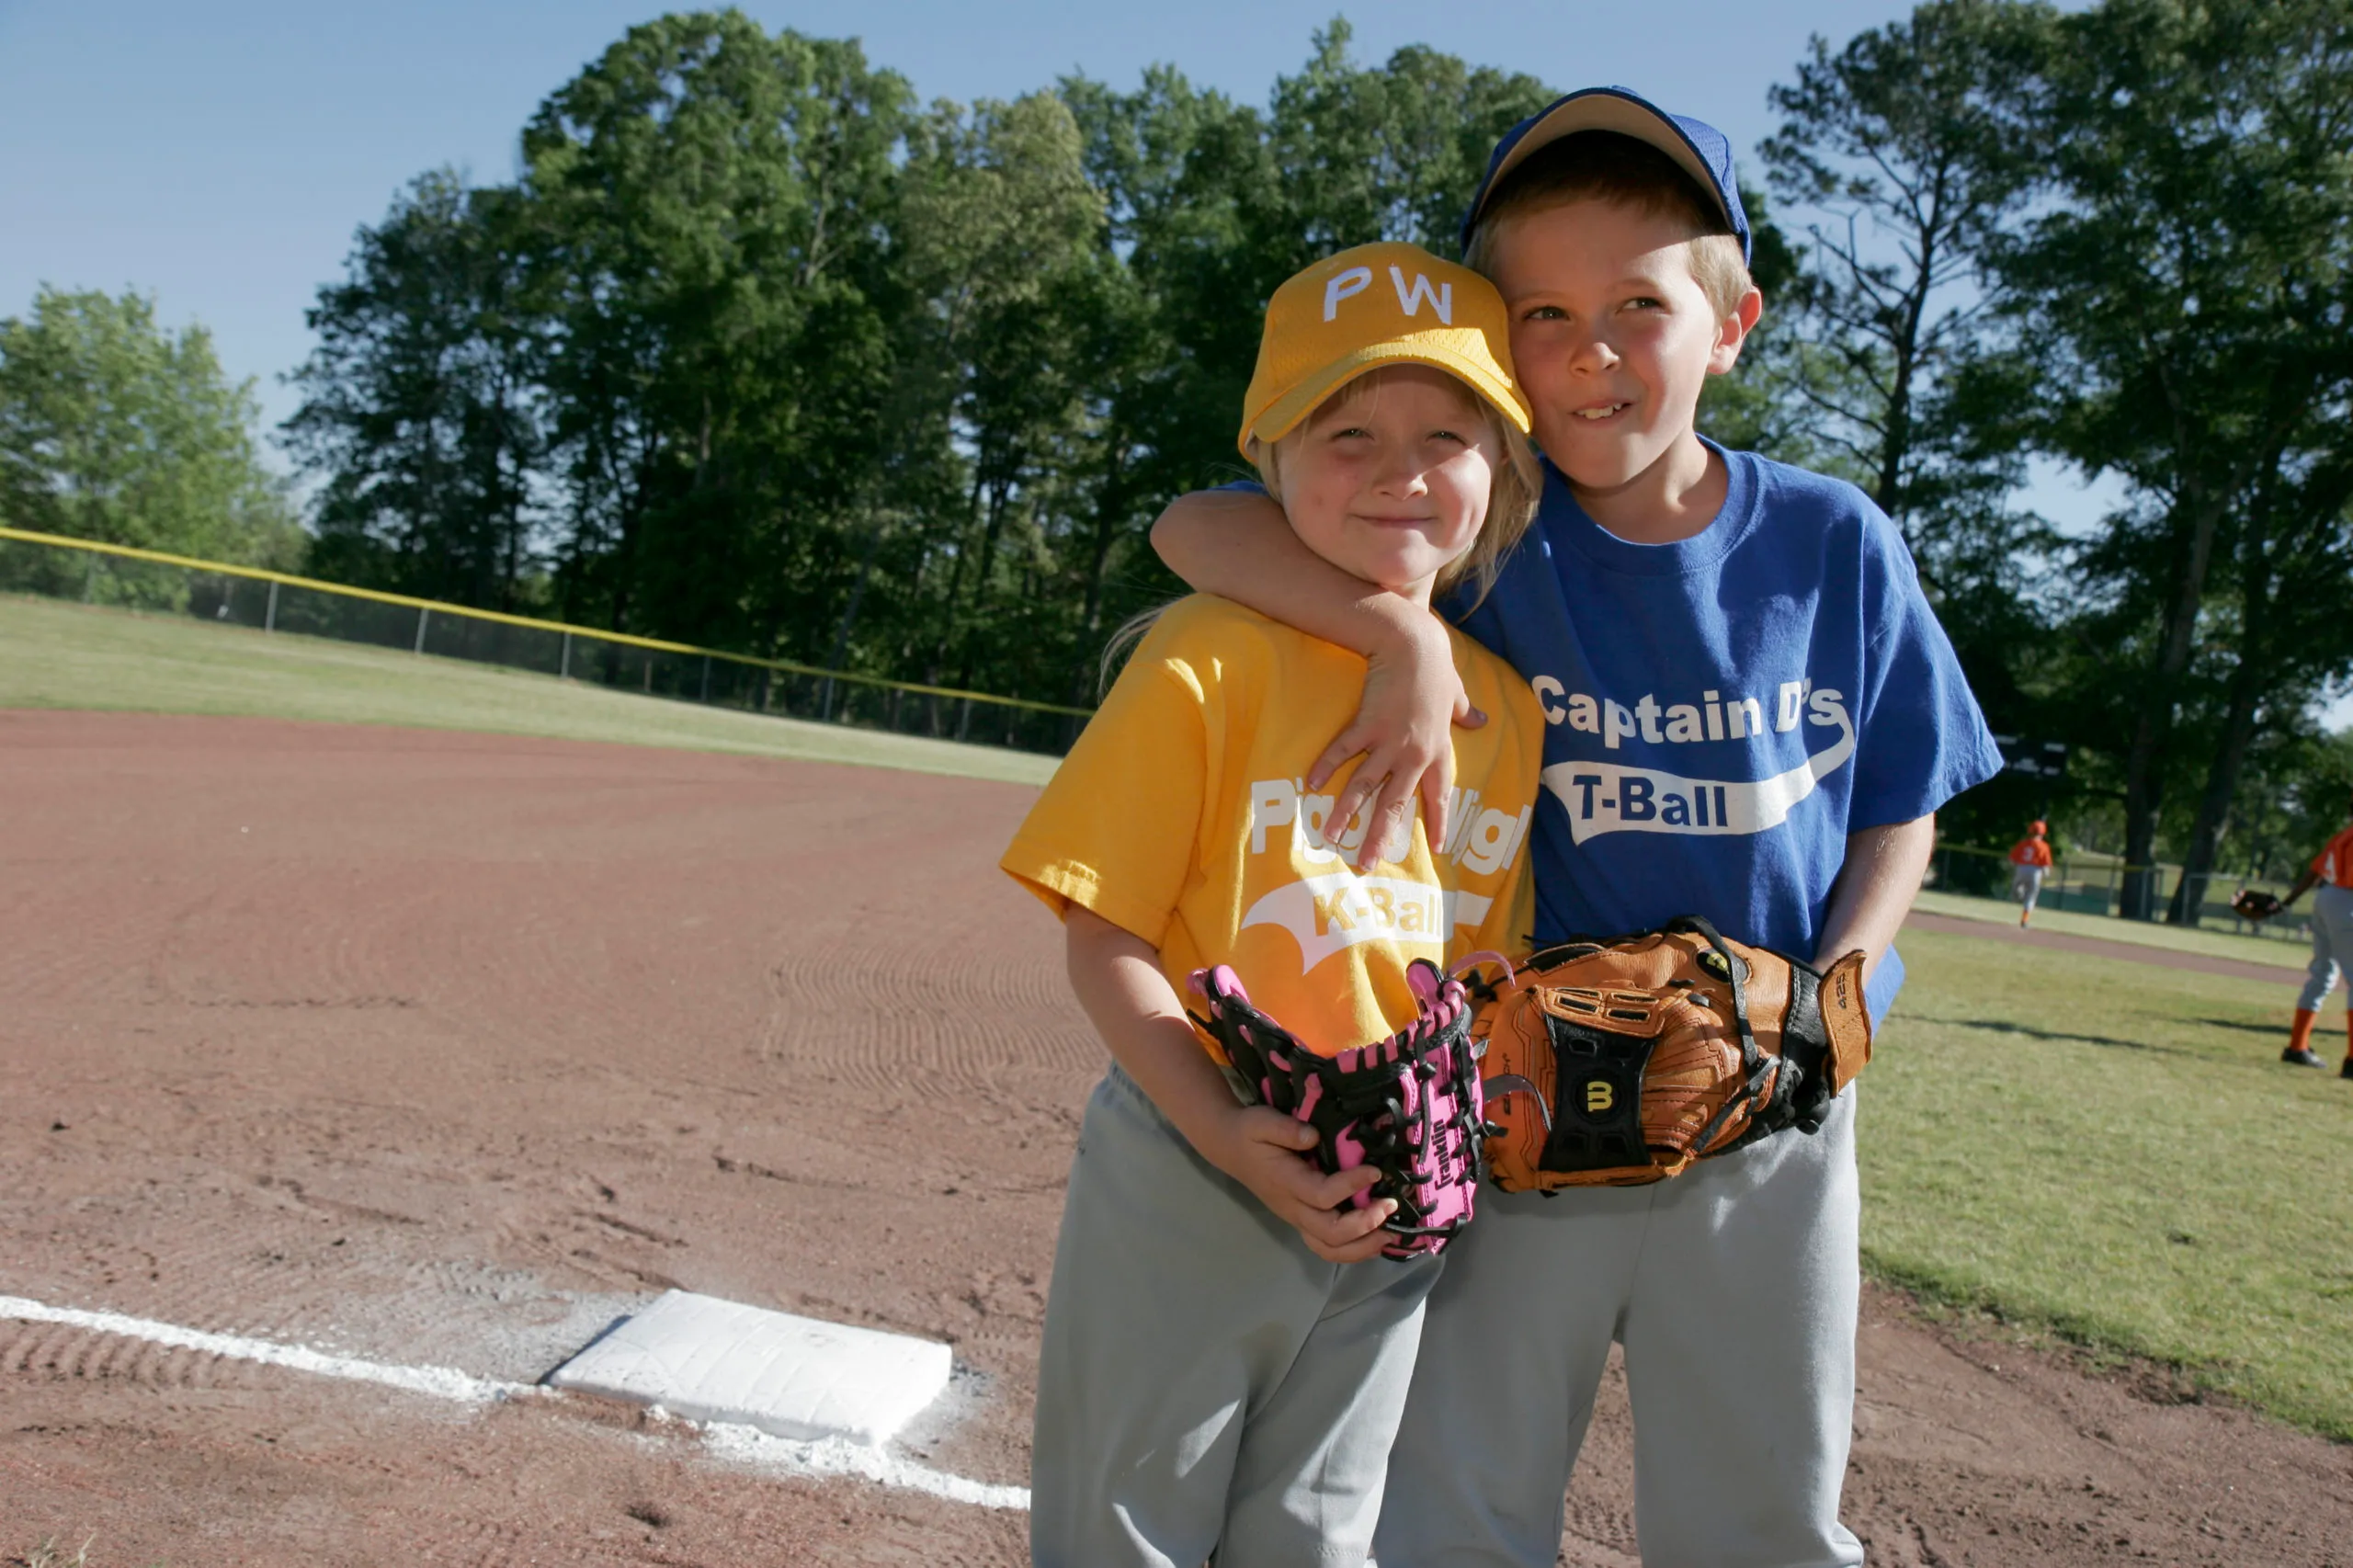 A sister and brother hugging on the pitch at the little league baseball at Veterans Park in Monroeville. (Photo by: Jeffrey Greenberg/Universal Images Group via Getty Images)